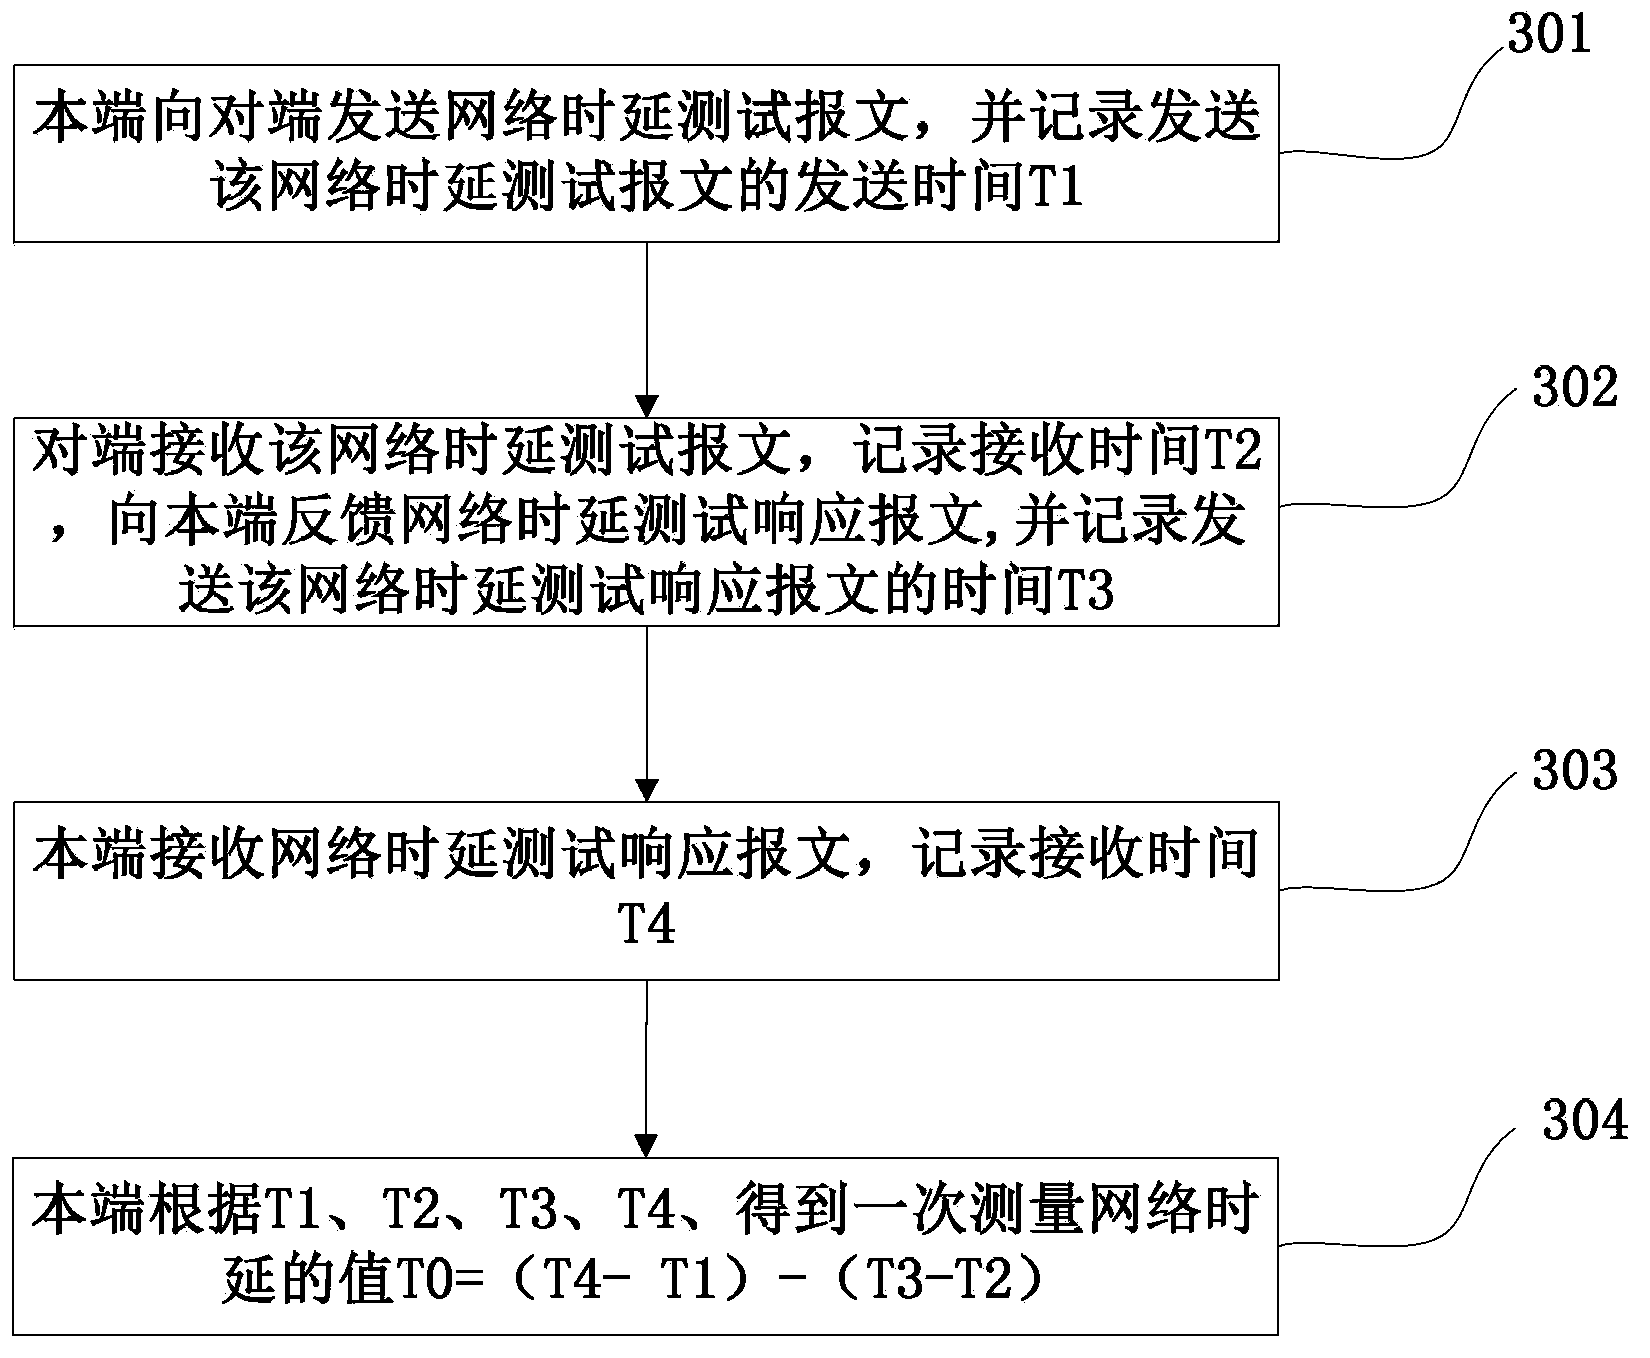 Bidirectional forwarding detection system and detection time configuration method of bidirectional forwarding detection